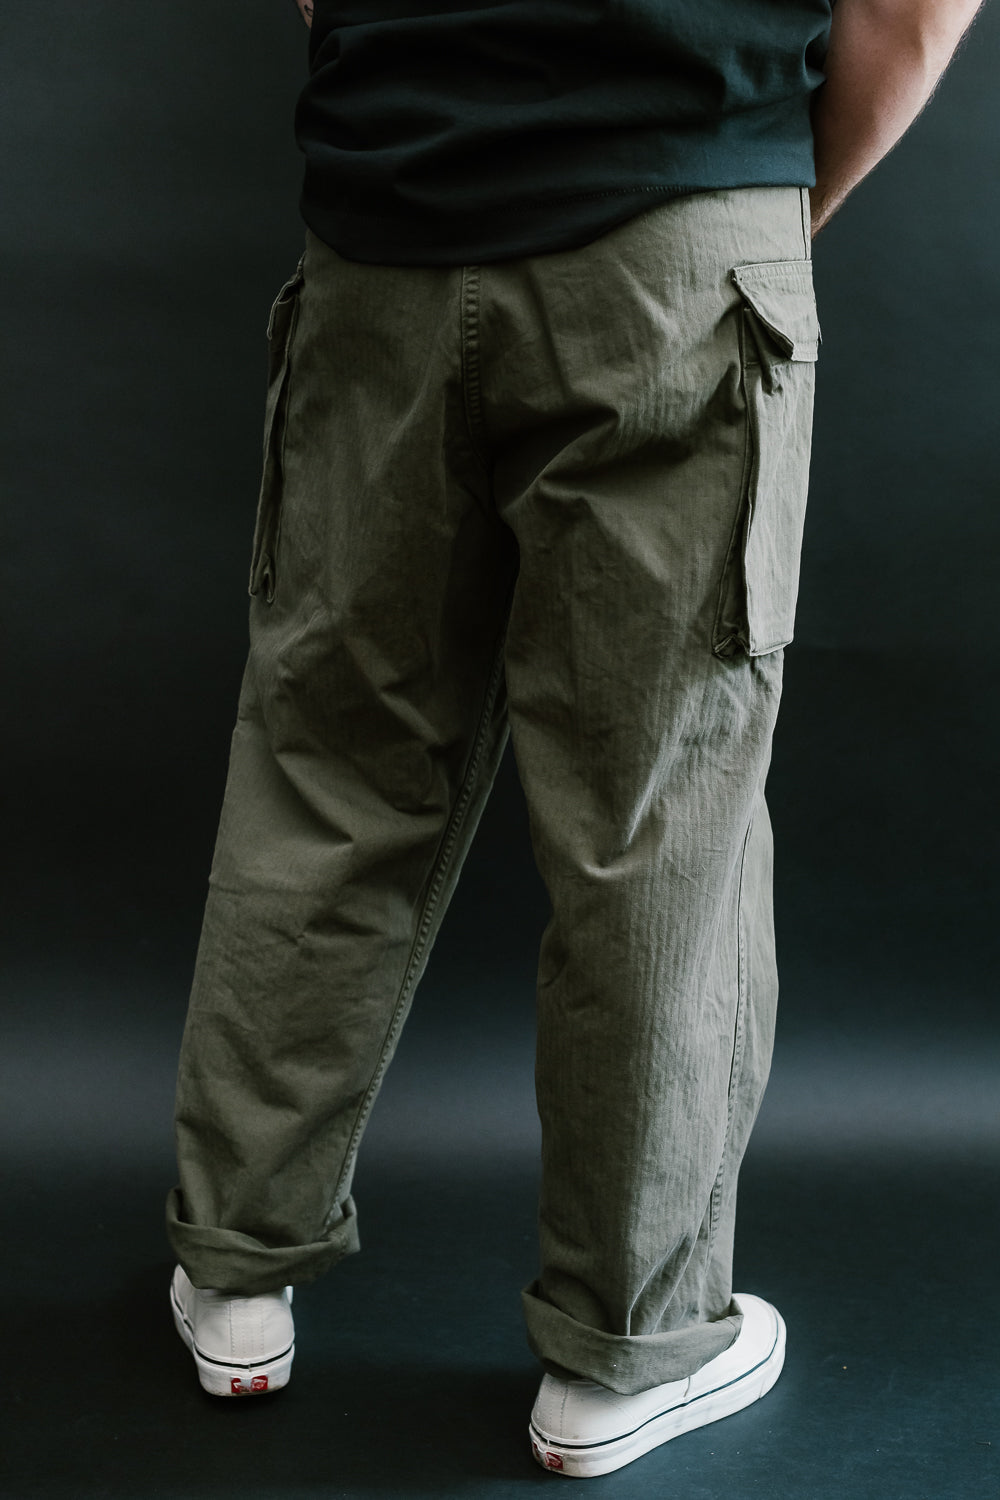 Green armored cargo pants